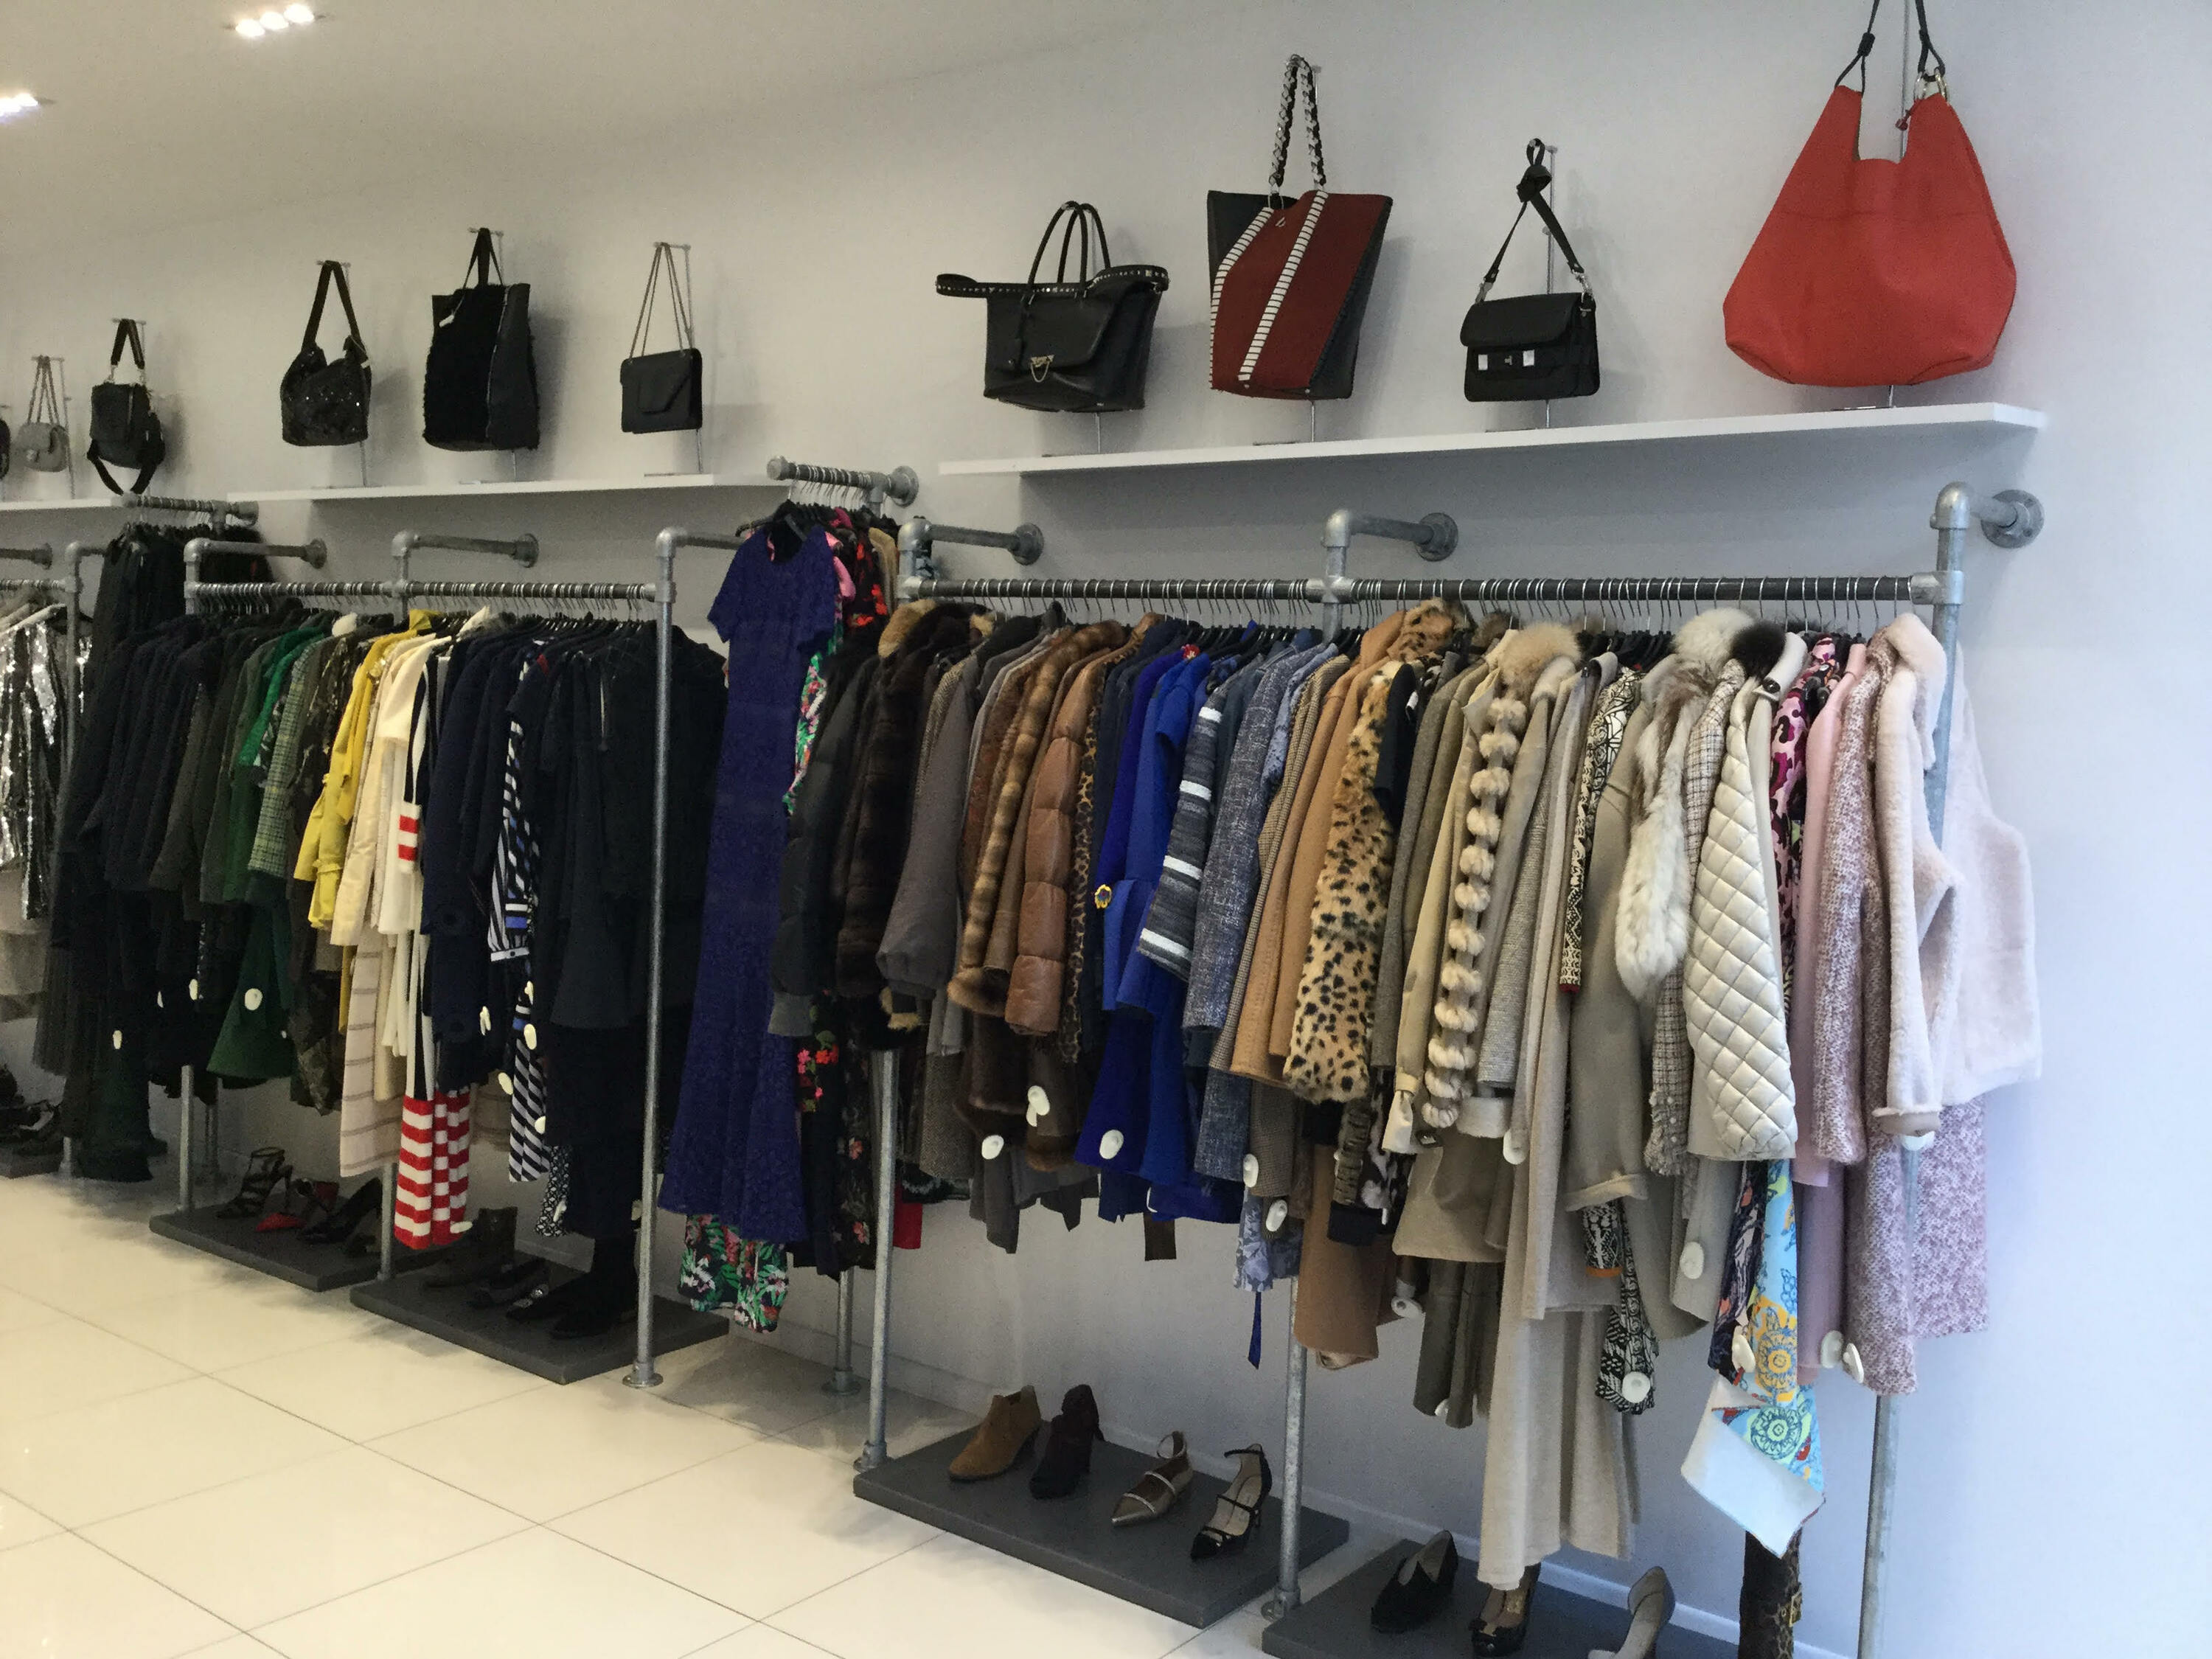 London’s Best Ethical Shops For Fashion | Sustainable Fashion in London